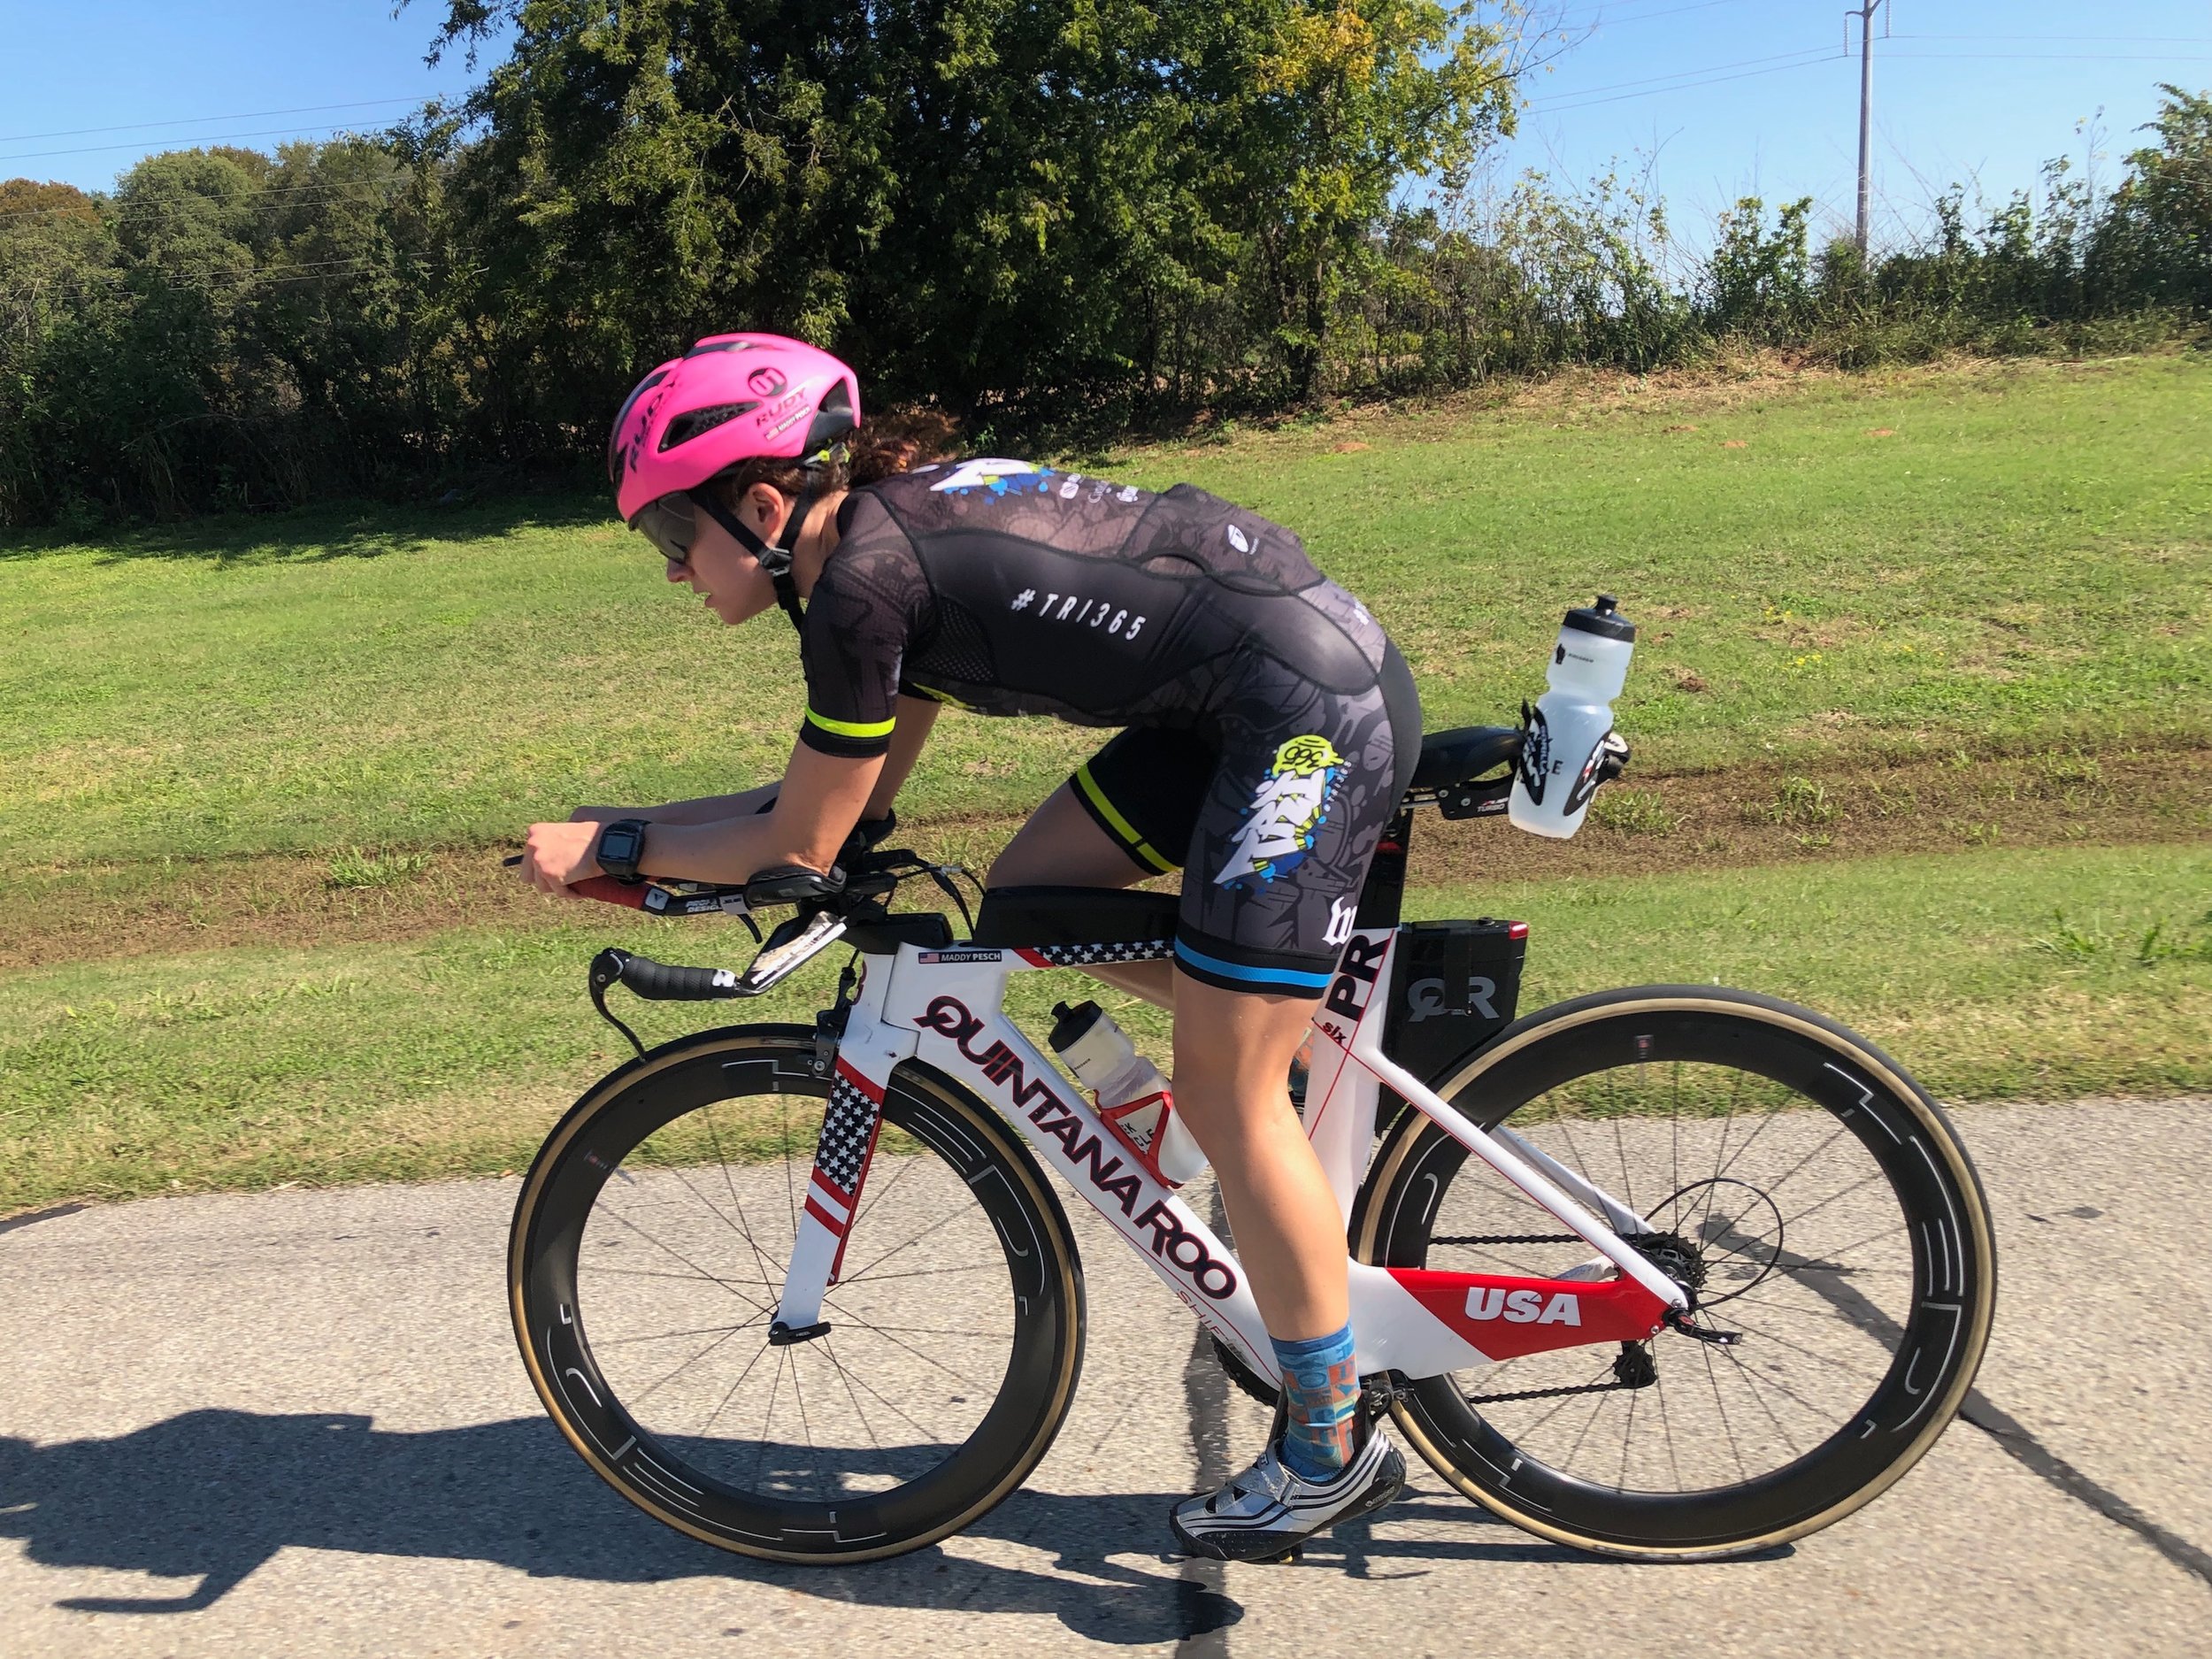 Coach_Terry_Wilson_Pursuit_of_The_Perfect_Race_IRONMAN_70.3_Waco_Maddy_Pesch_PRO.jpg